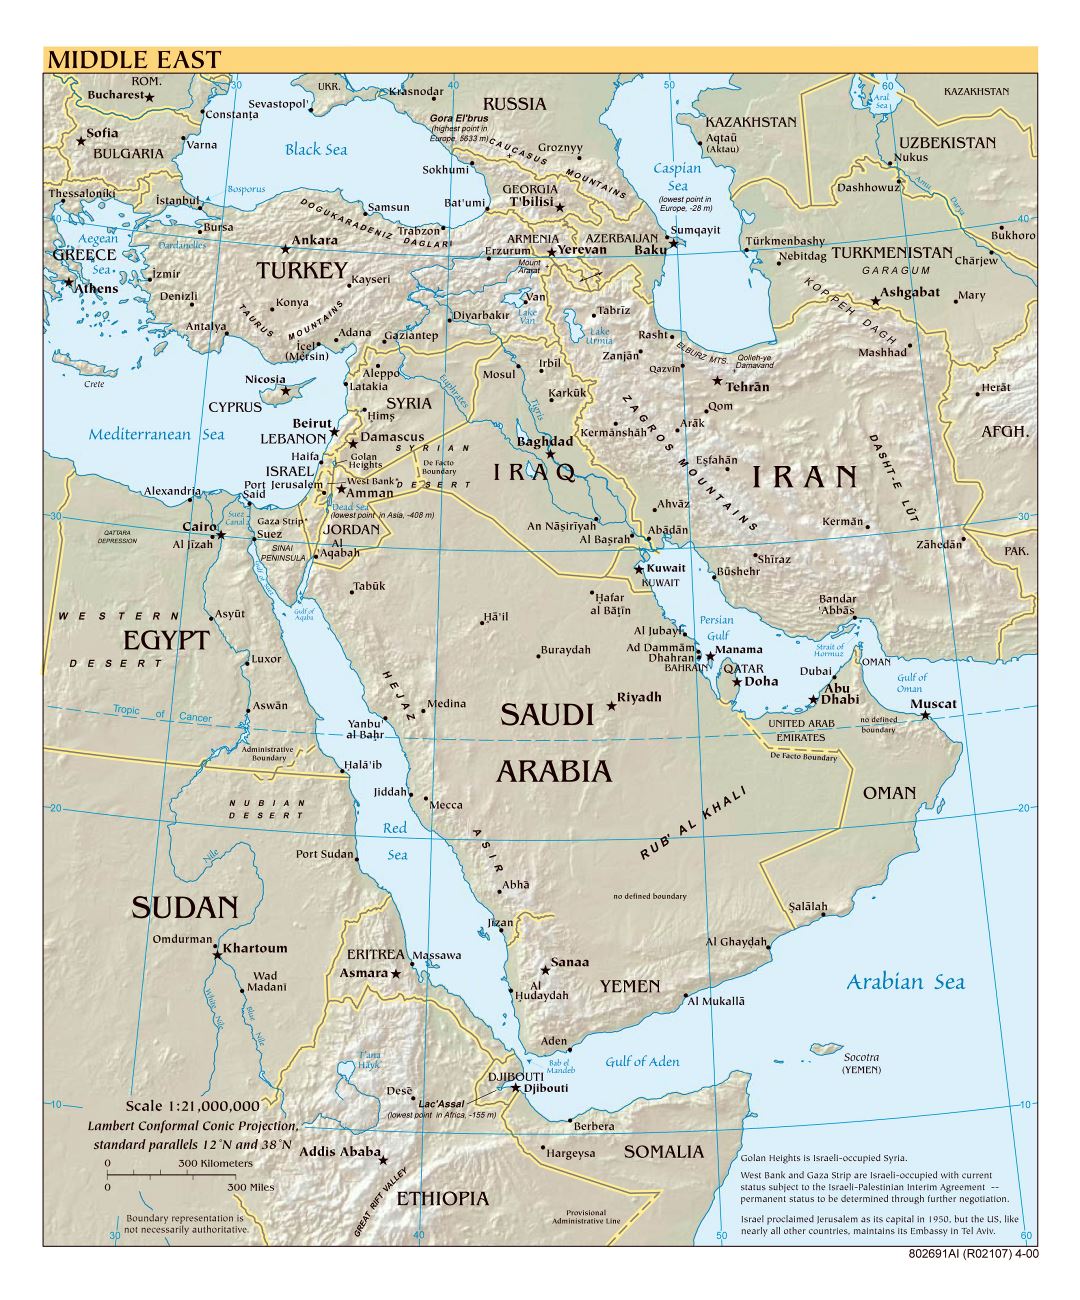 Large scale political map of the Middle East with relief, major cities and capitals - 2000